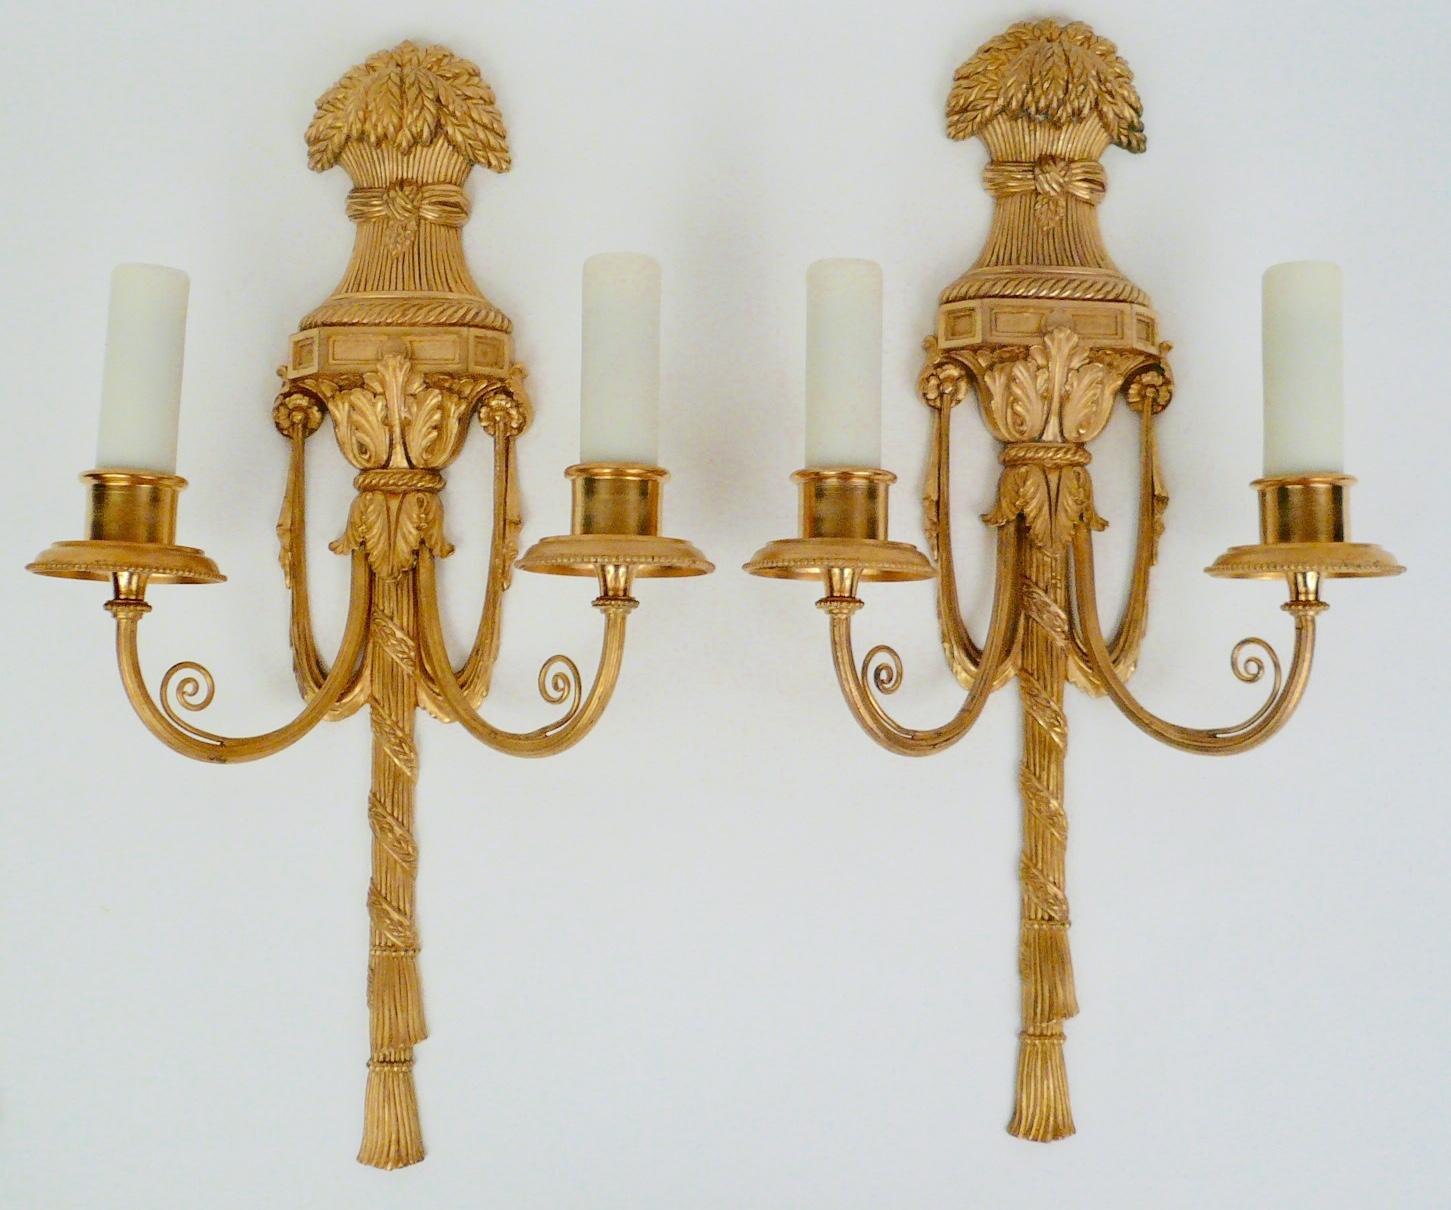 This handsome pair of gilt bronze sconces feature Classical motifs including acanthus leaves, swags and tassels. They are in excellent condition, retaining their original gilding, and are signed Caldwell.